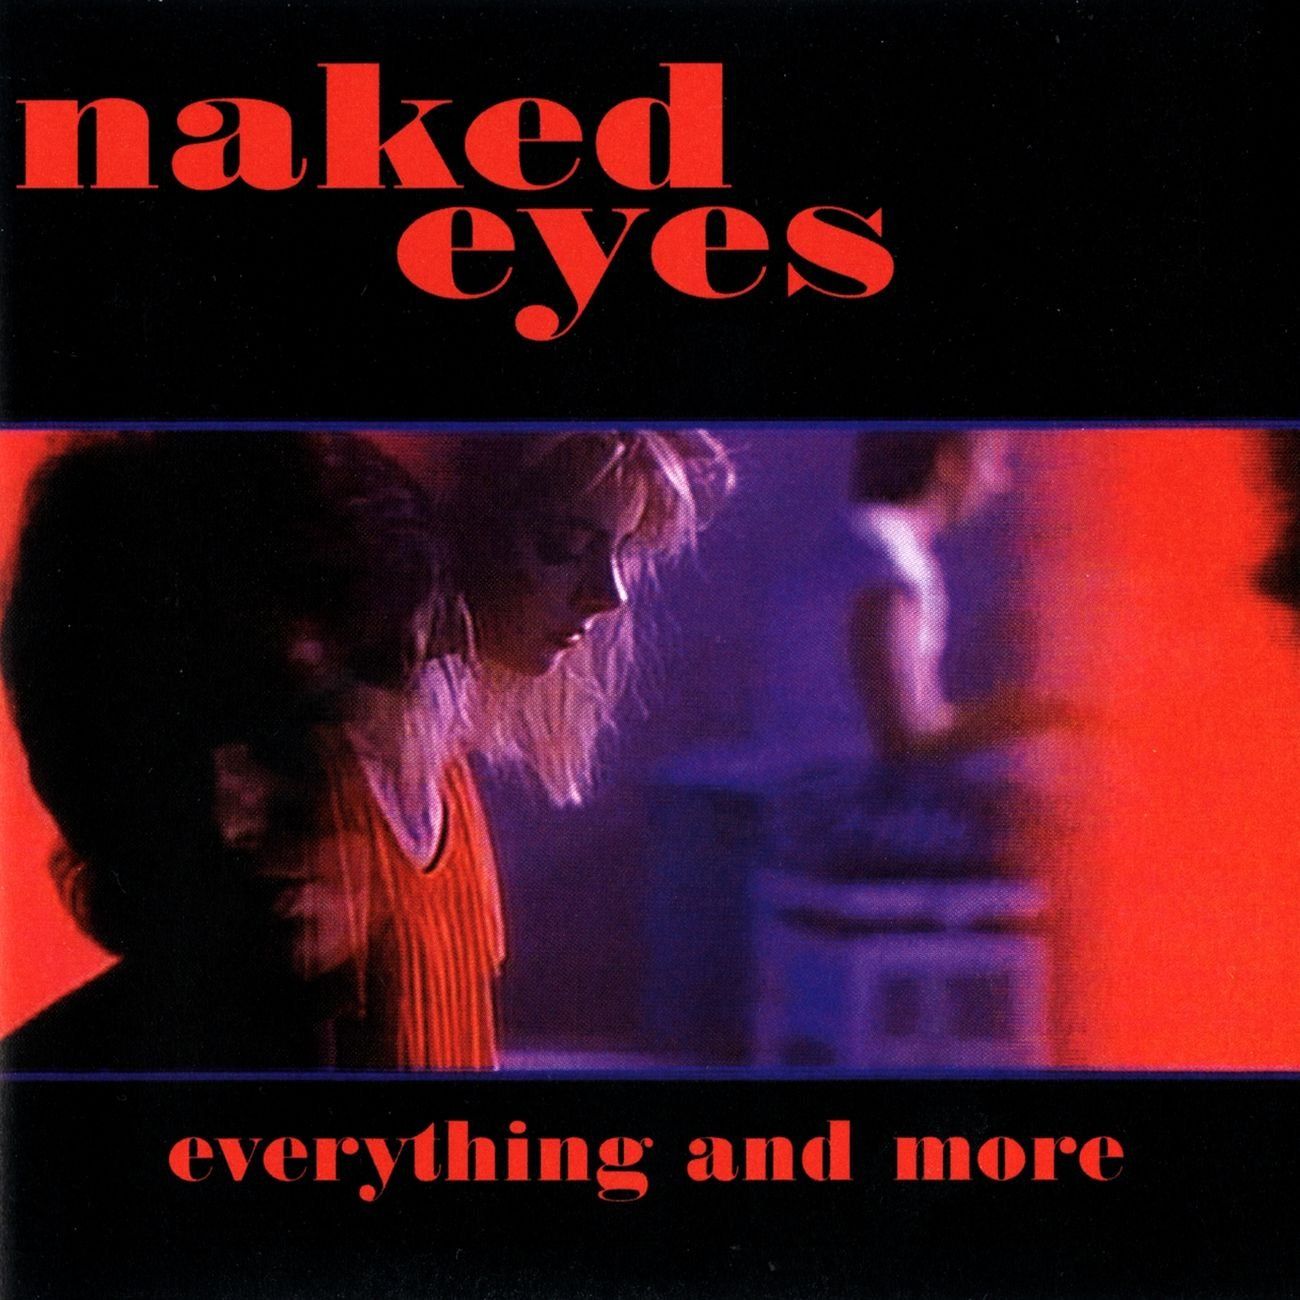 Naked eyes everything and more